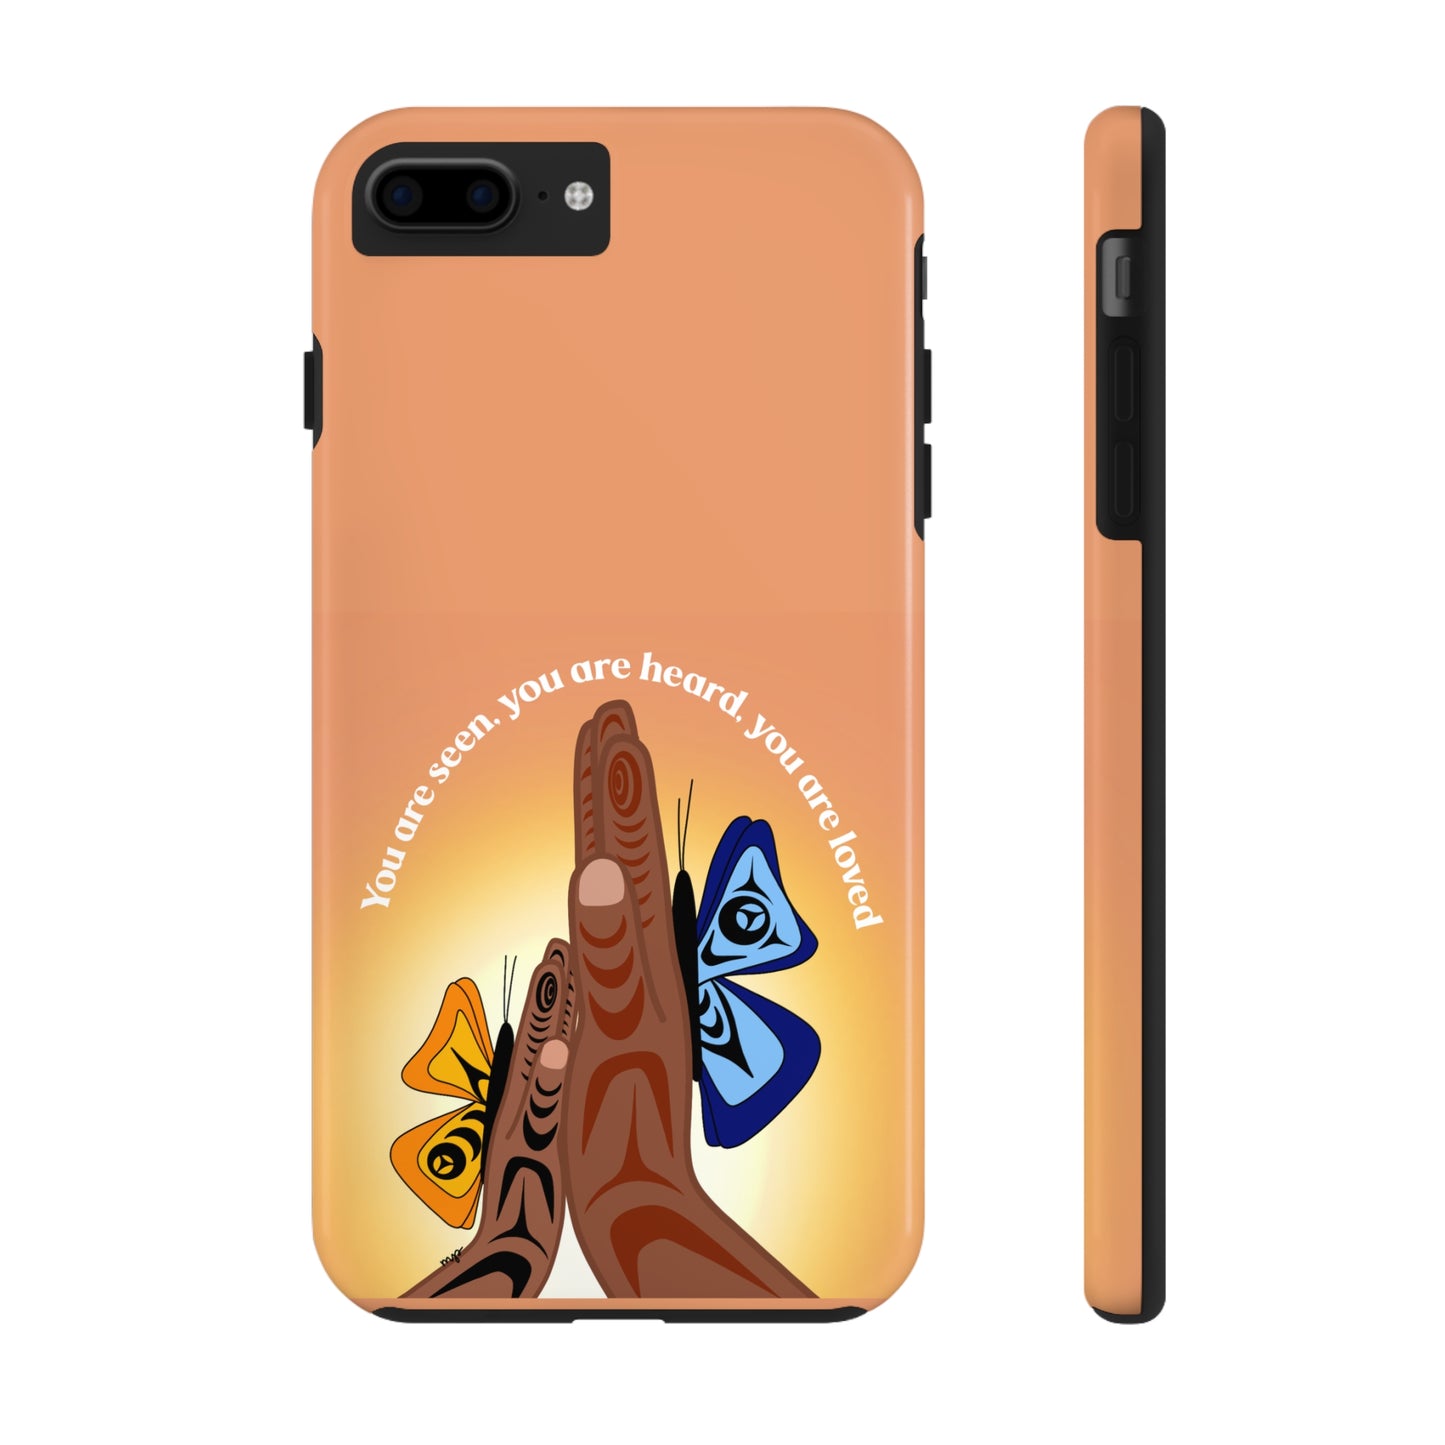 You are seen you are heard you are love phone case